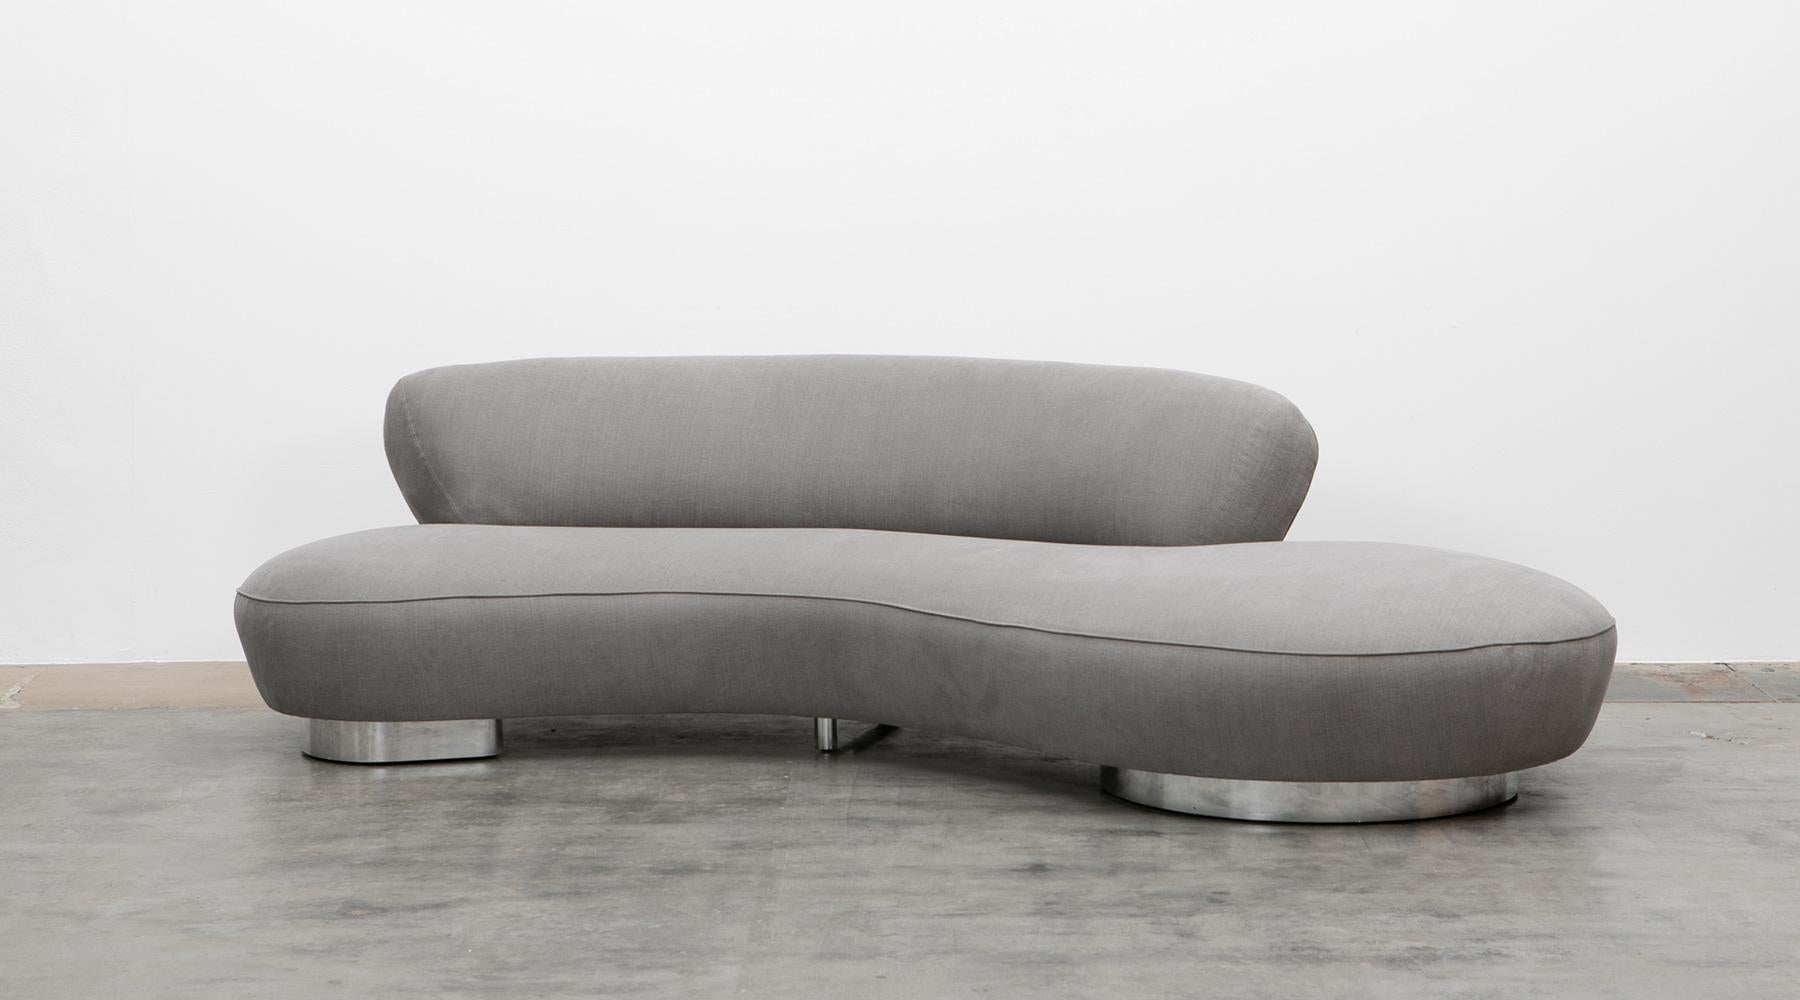 Sofa, new upholstery in high-quality fabric, USA, 1978.

'Long Island' sofa by German-born American Vladimir Kagan. Manufactured for Club House Italia as part of their New York Collection. Kagan has made himself a name through his extravagant